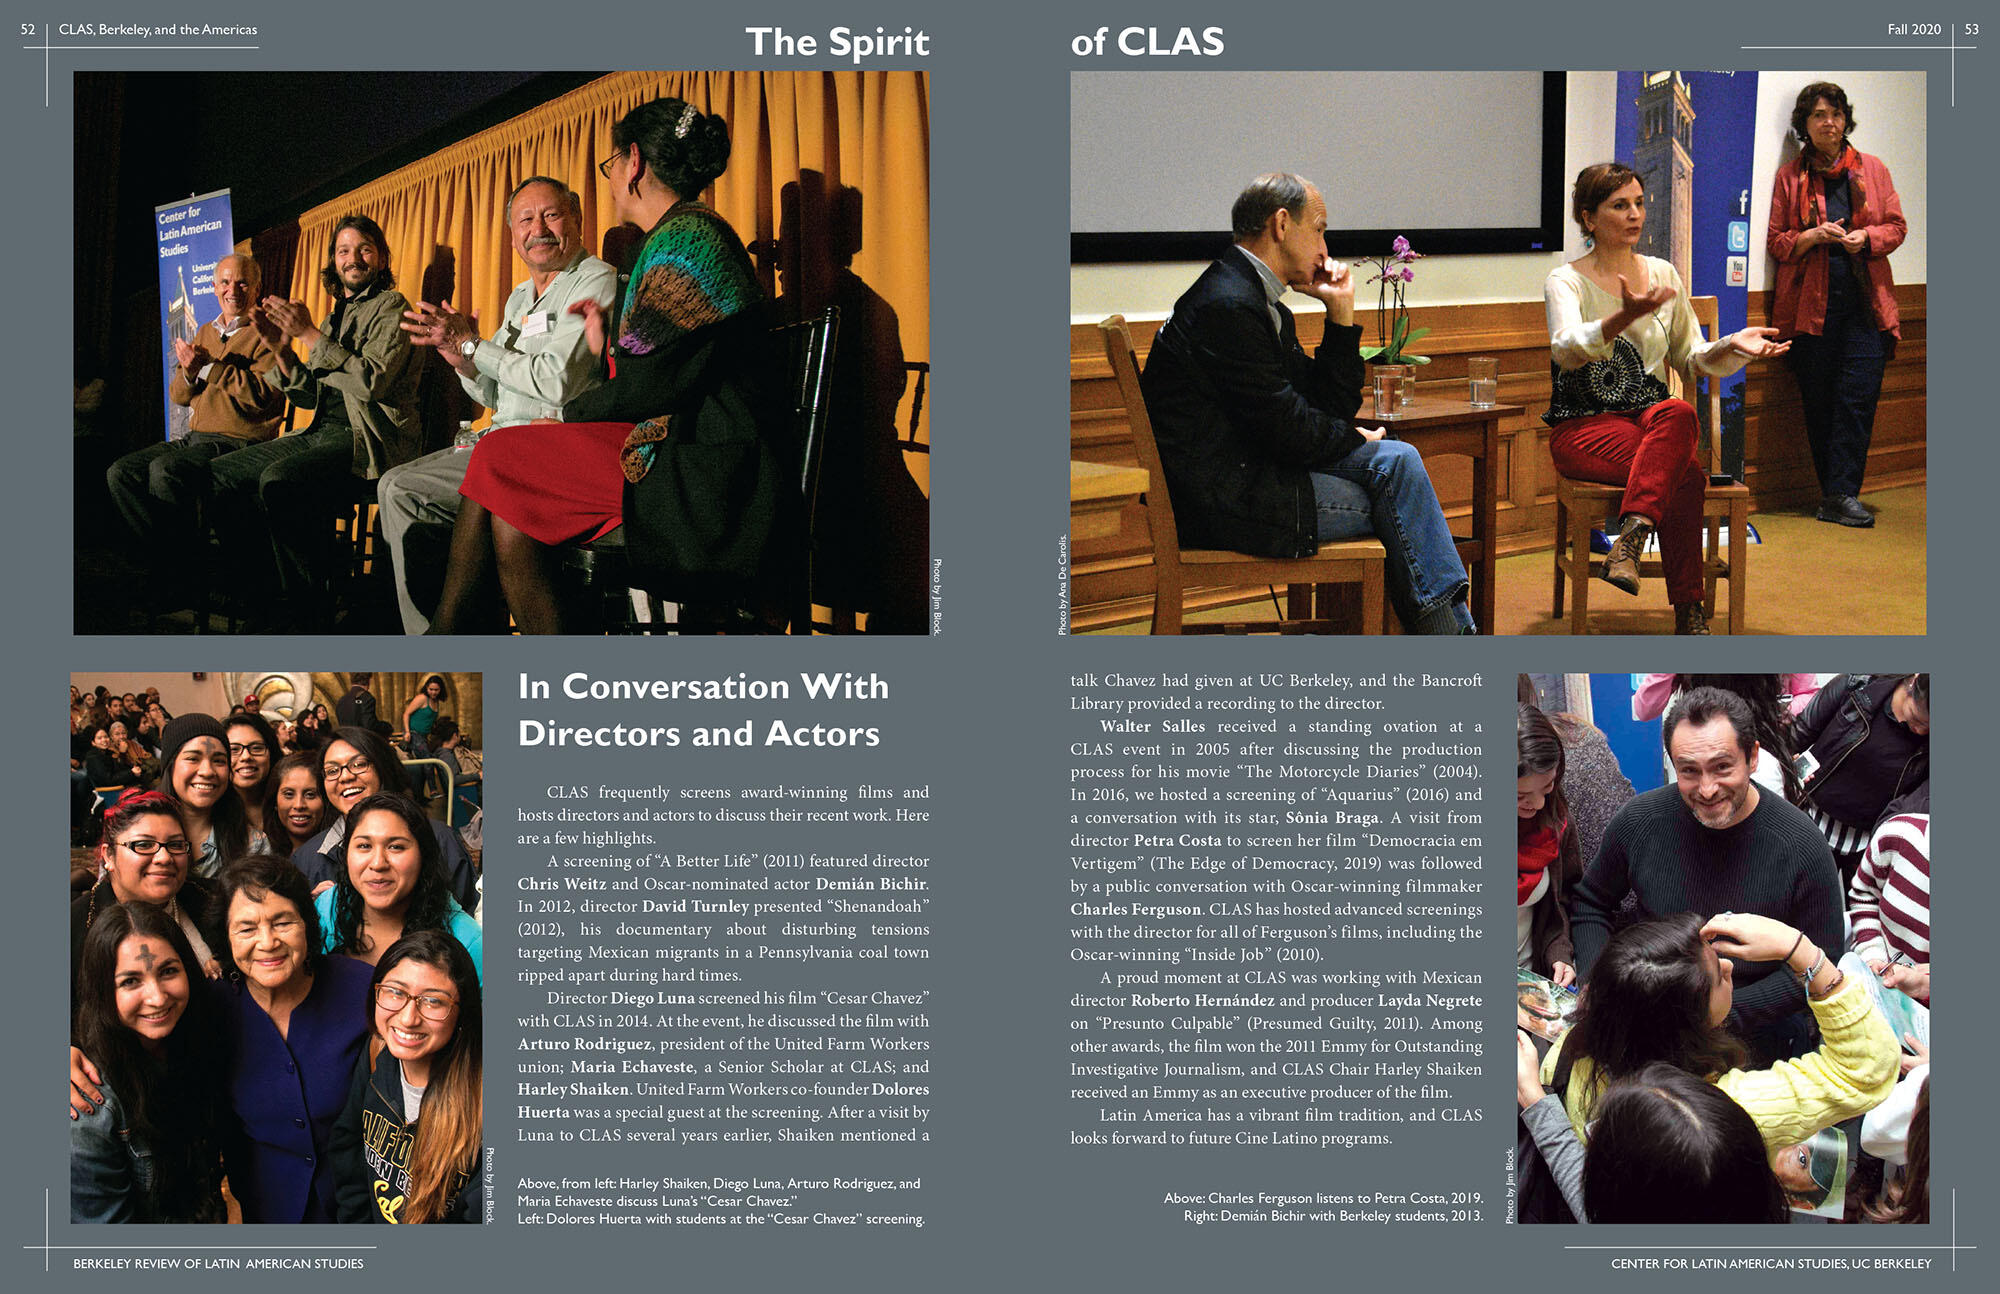 Two pages dedicated to CLAS and film, including Charles Ferguson, Diego Luna (with Dolores Huerta at one of his screenings), Petra Costa, and Demián Bichir. (Image from CLAS.)